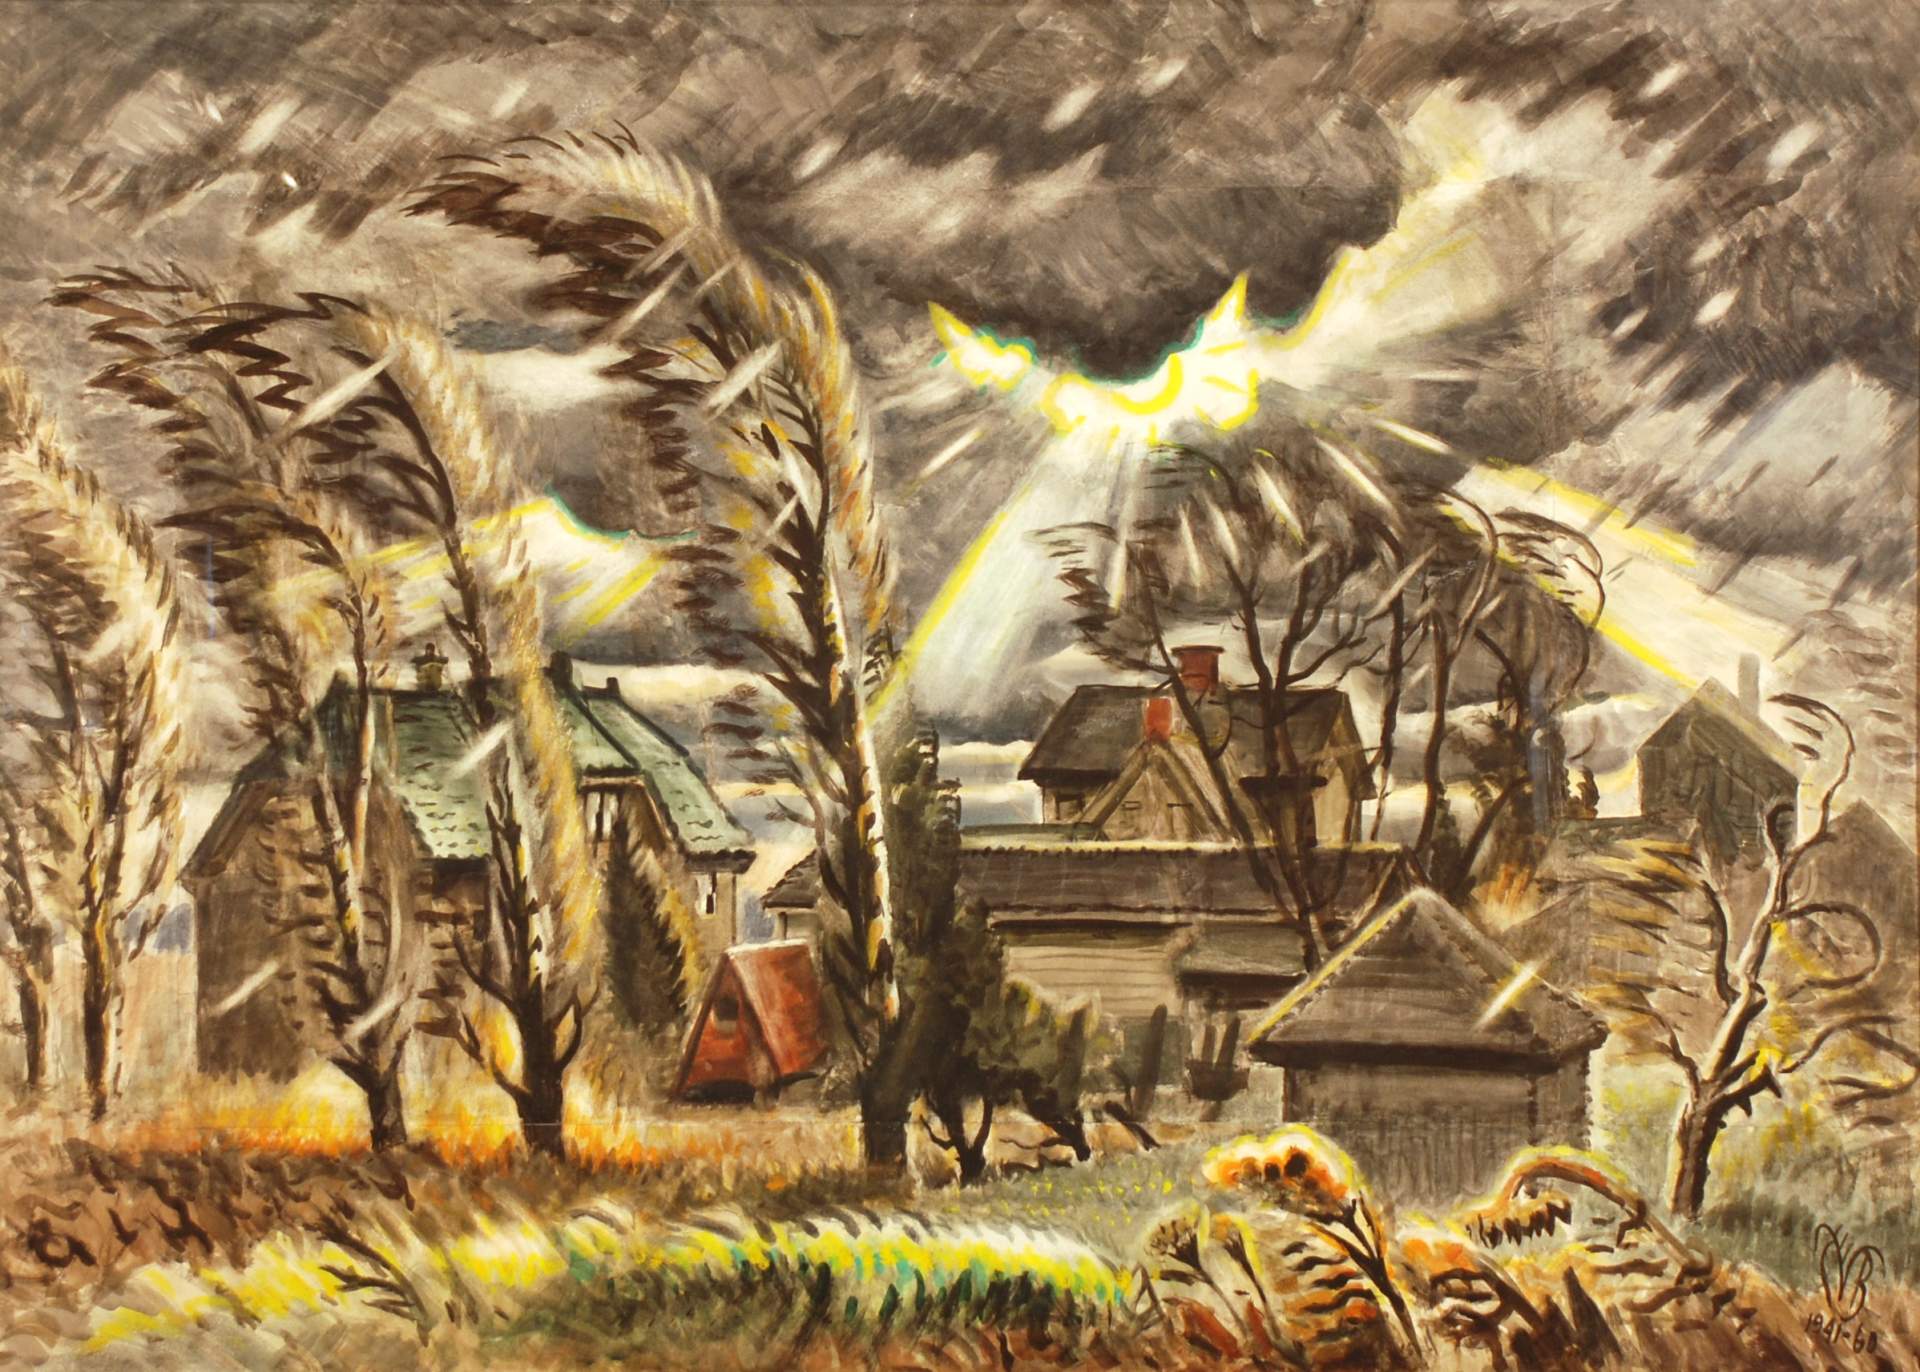 The First Exhibition: 50 Years with Charles E. Burchfield